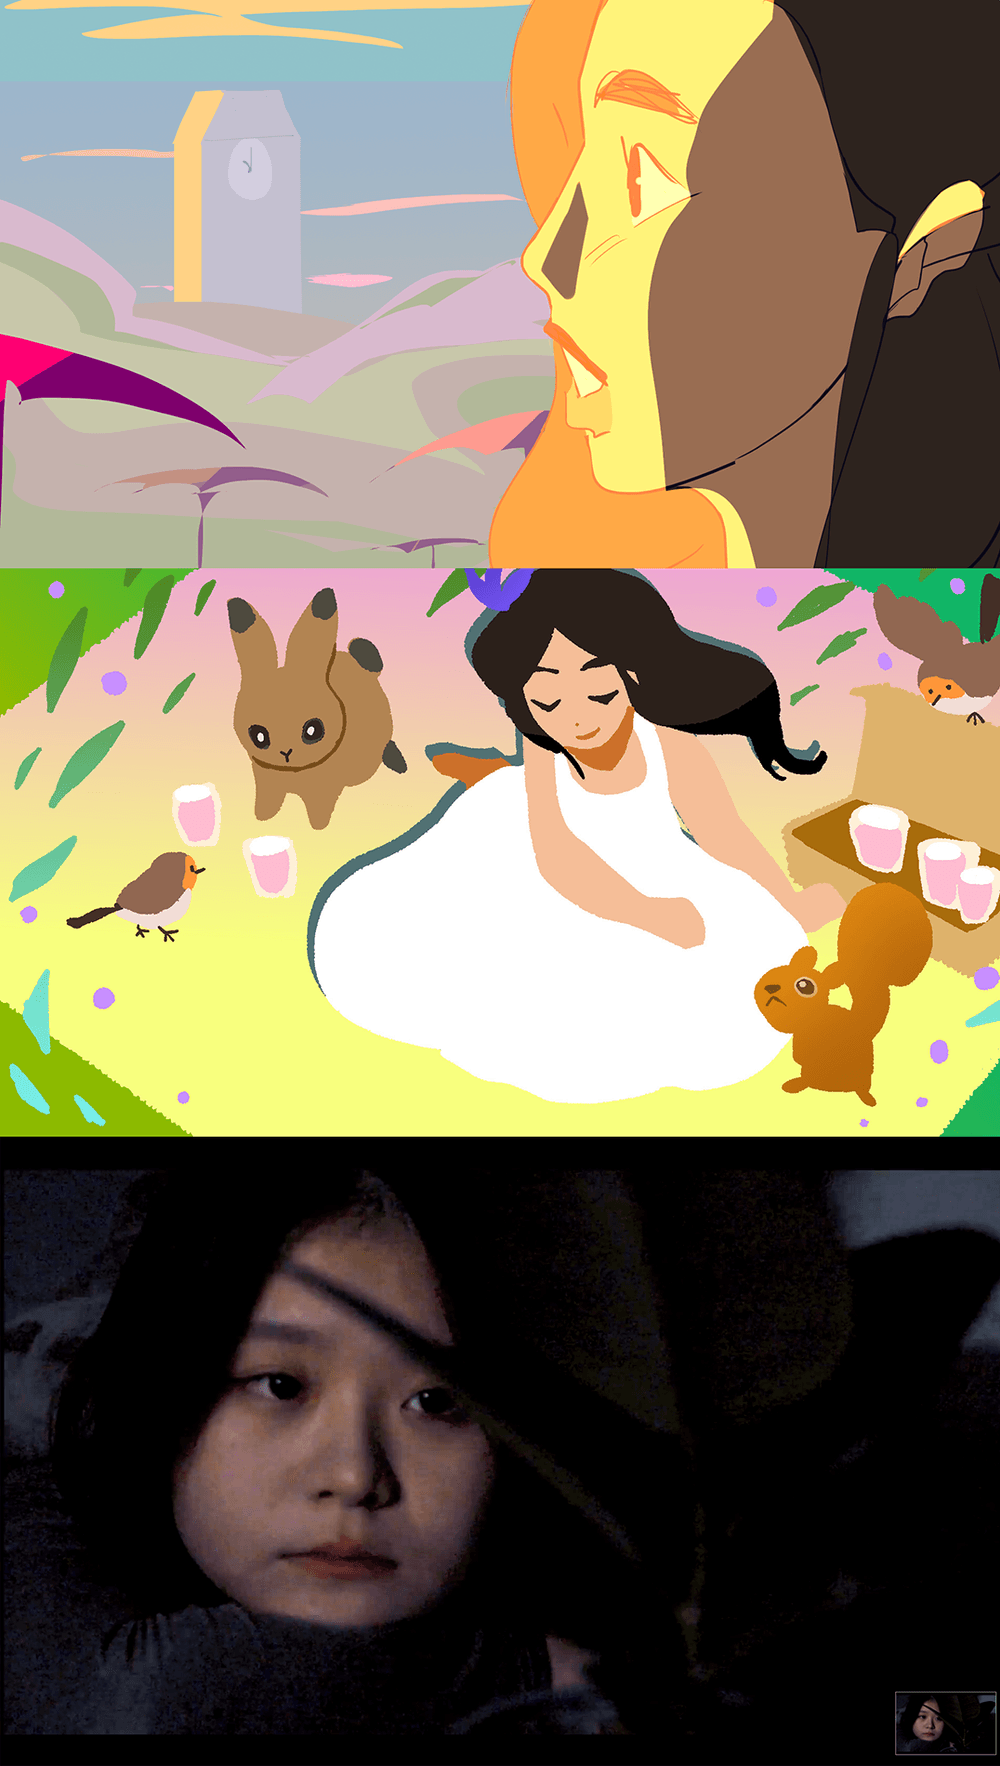 3 stills from the animated film